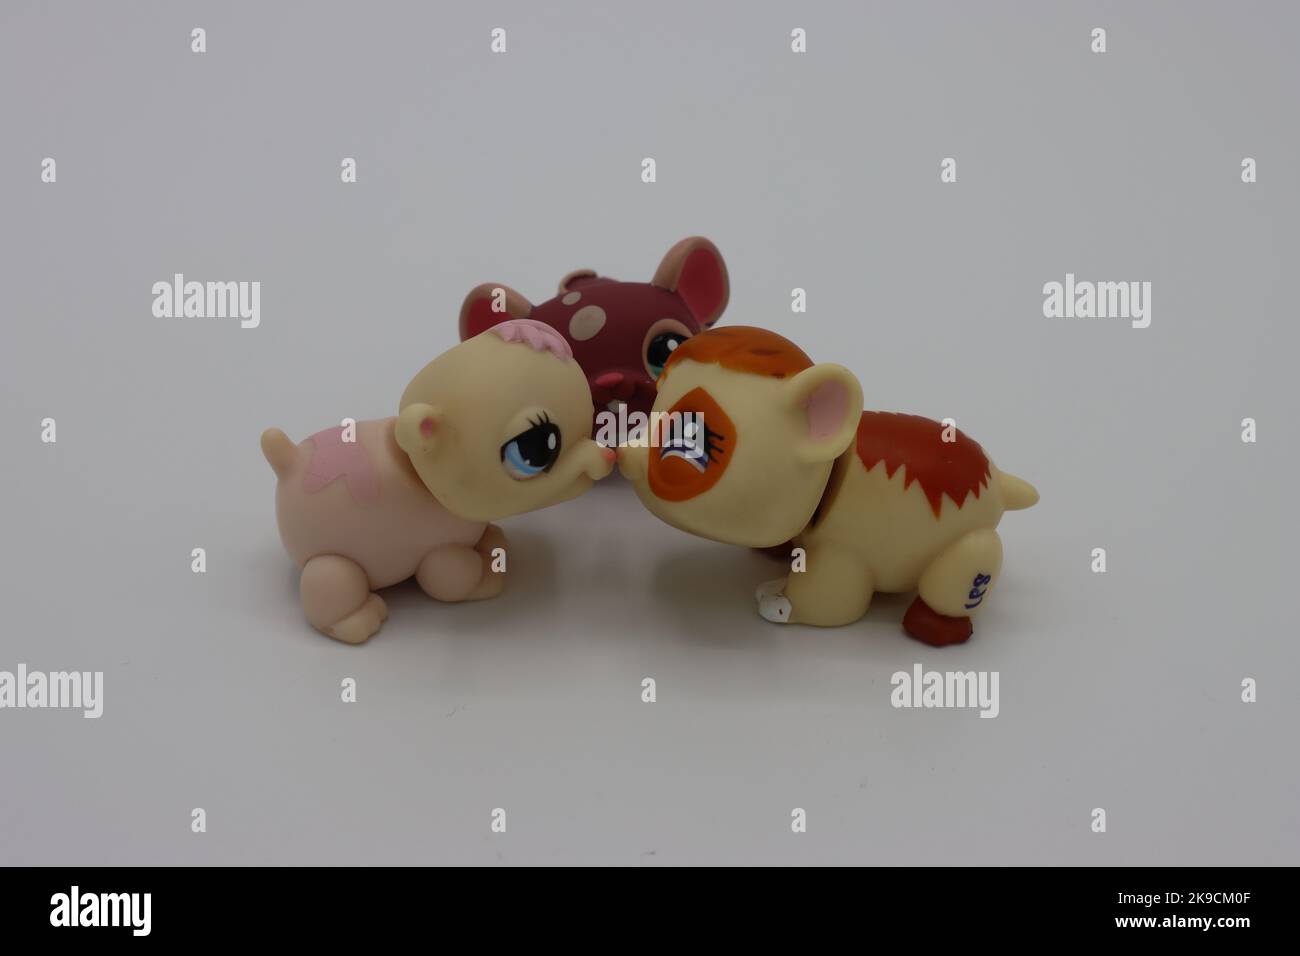 https://c8.alamy.com/comp/2K9CM0F/tiny-cute-plastic-kissing-guinea-piganimal-figure-on-a-white-background-collectible-isolated-littlest-pet-shop-figure-with-big-head-and-big-eyes-2K9CM0F.jpg